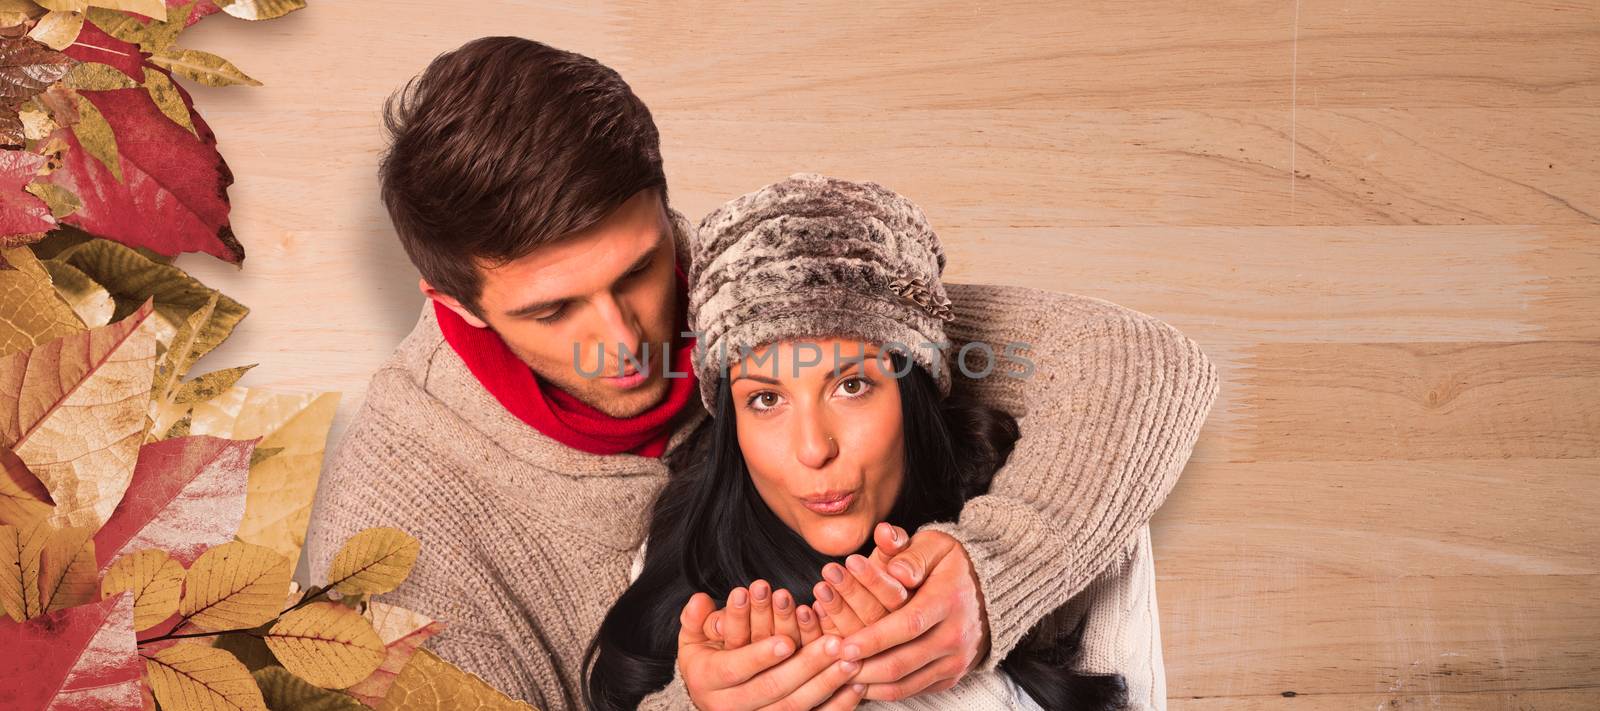 Young couple blowing over hands against bleached wooden planks background